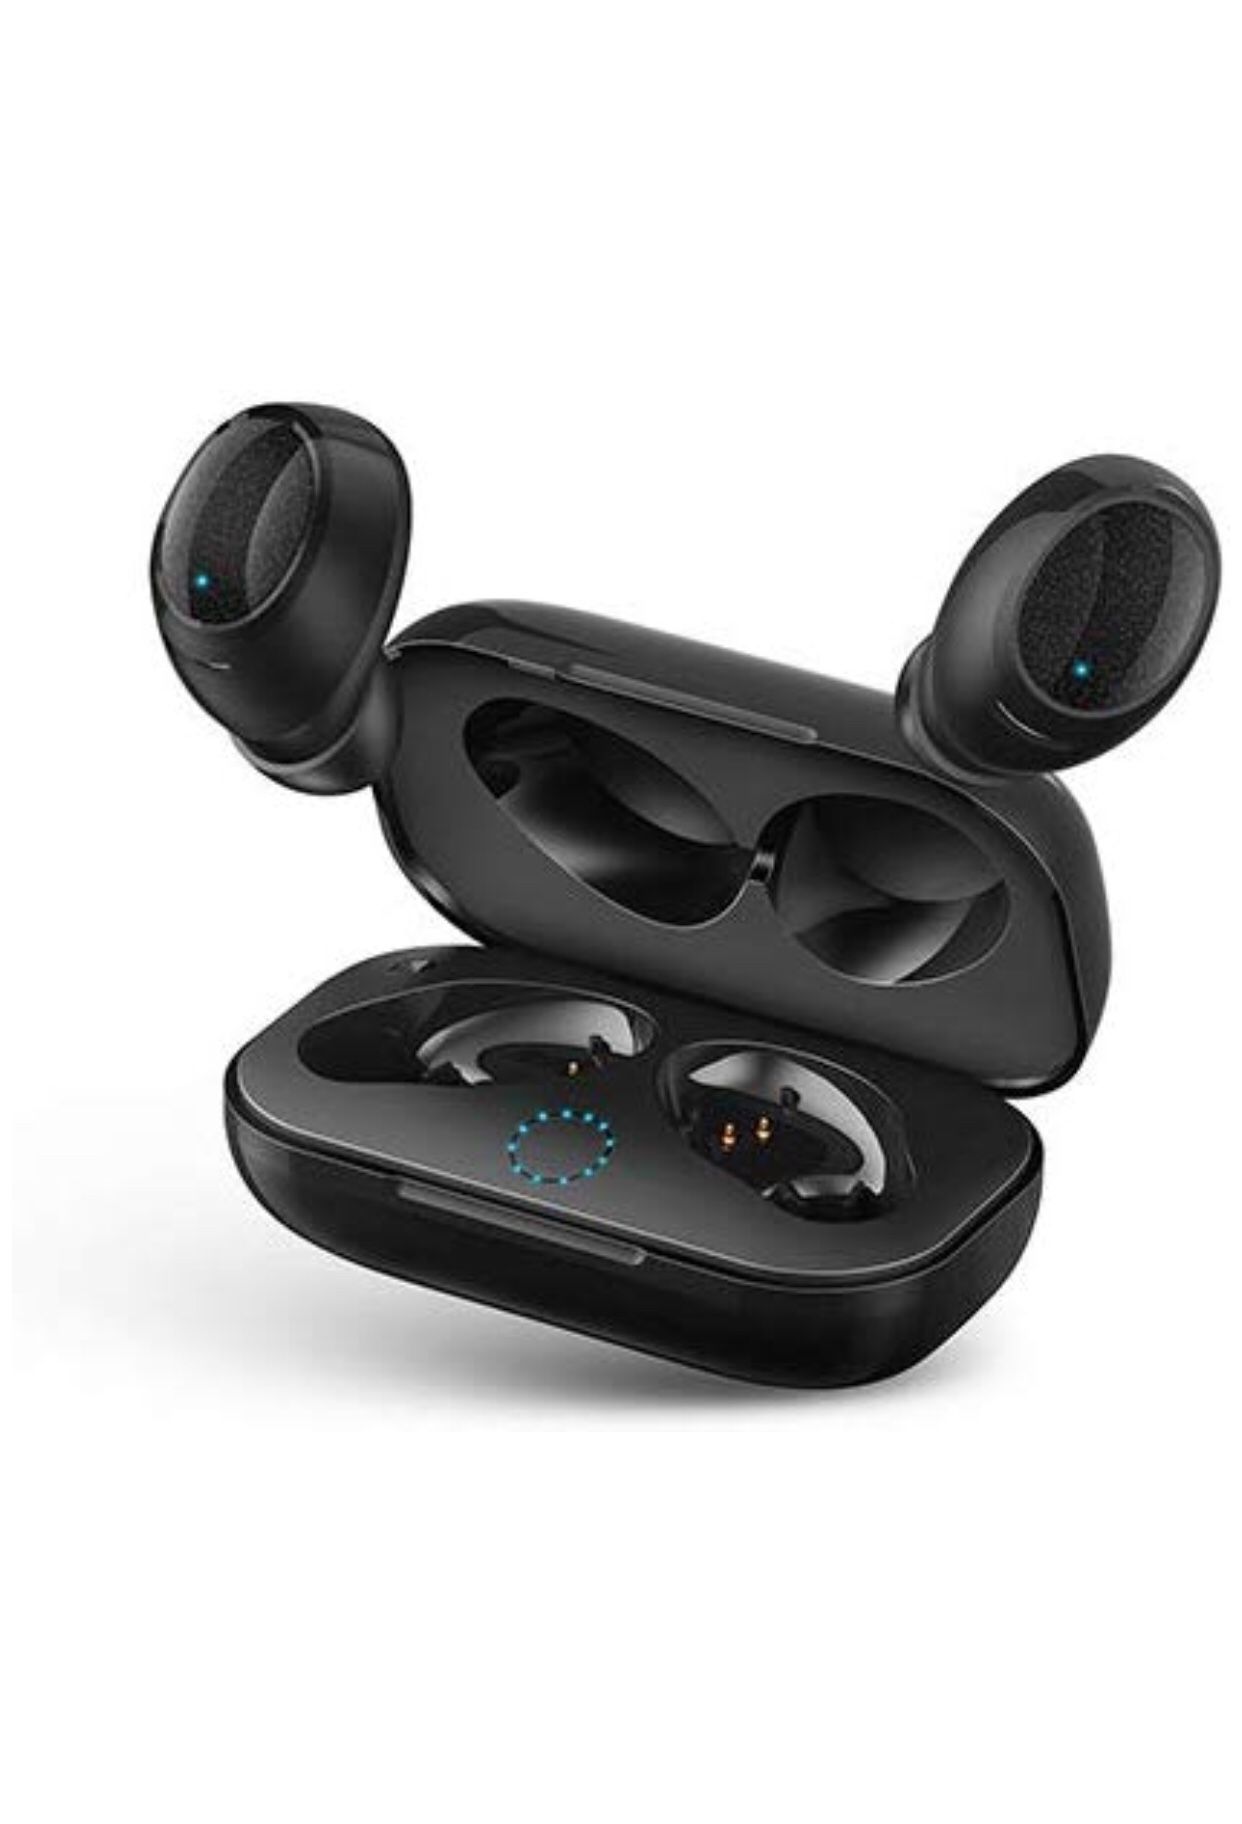 Bluetooth Earbuds, Bluetooth 5.0 True Wireless Earbuds with Charging Case, 33-66 ft Bluetooth Range, Crystal 3D Stereo Audio in-Ear Bluetooth Headpho